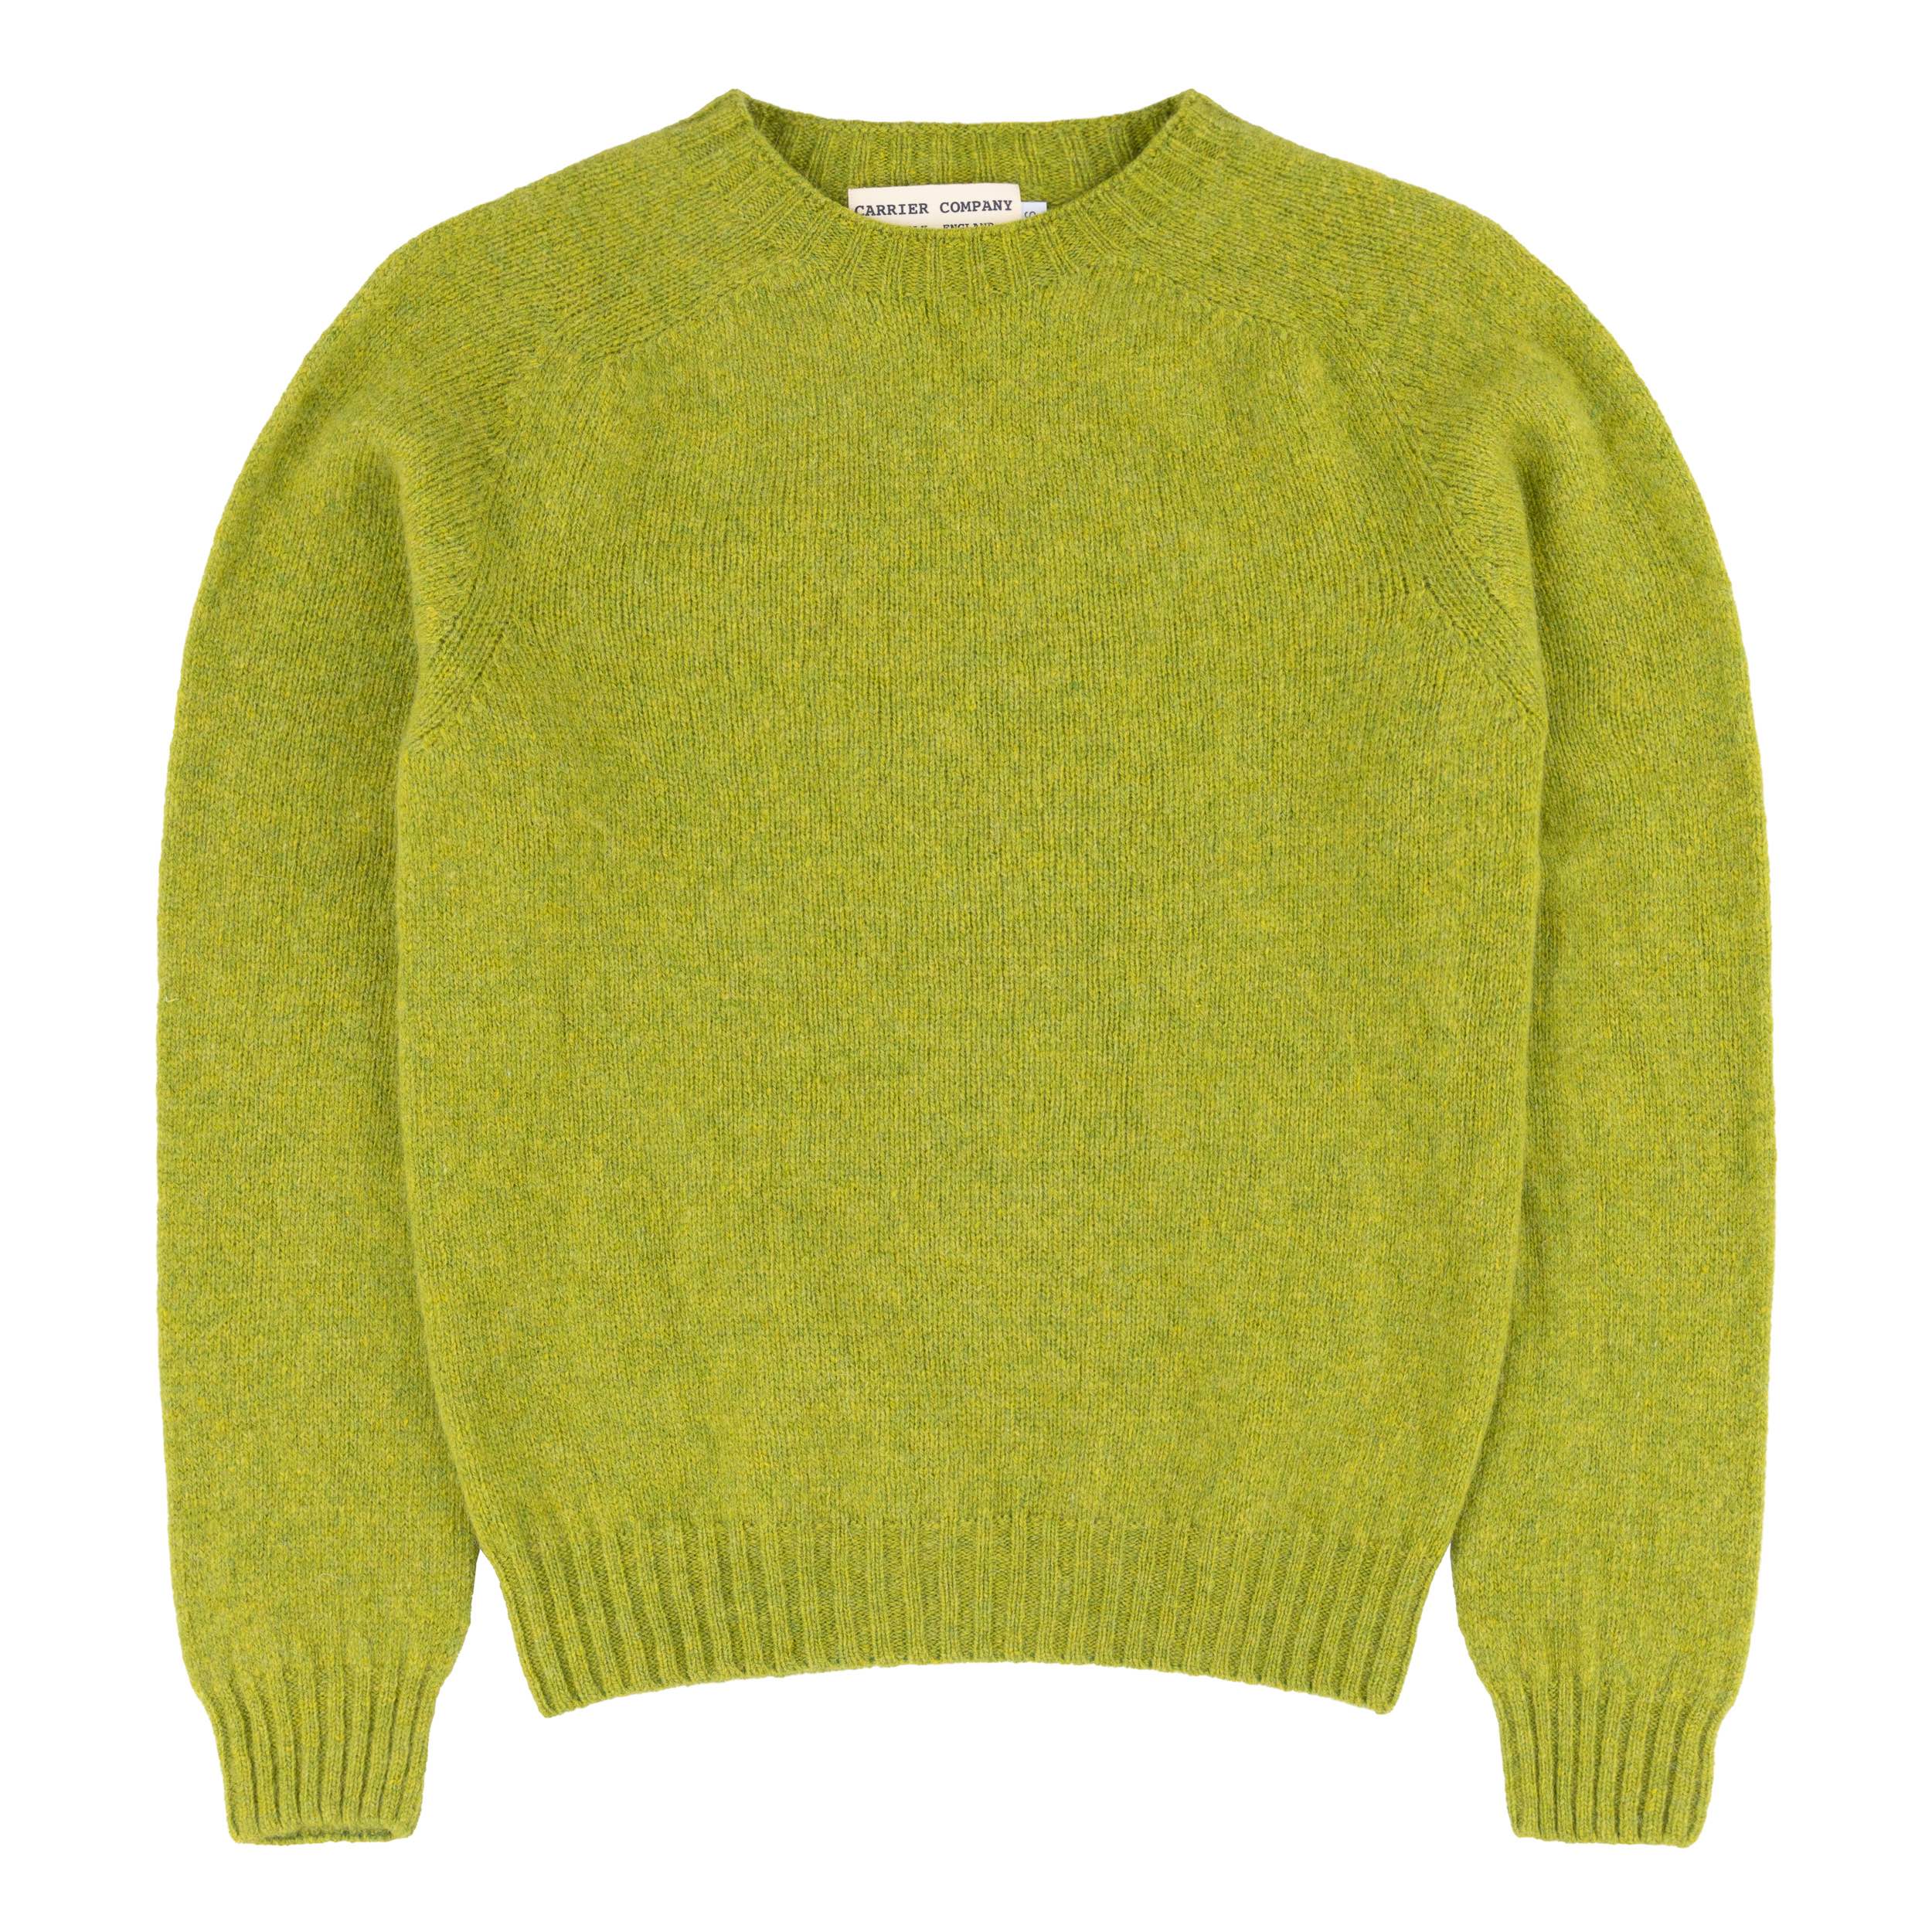 Carrier Company Shetland Lambswool Jumper in Lime